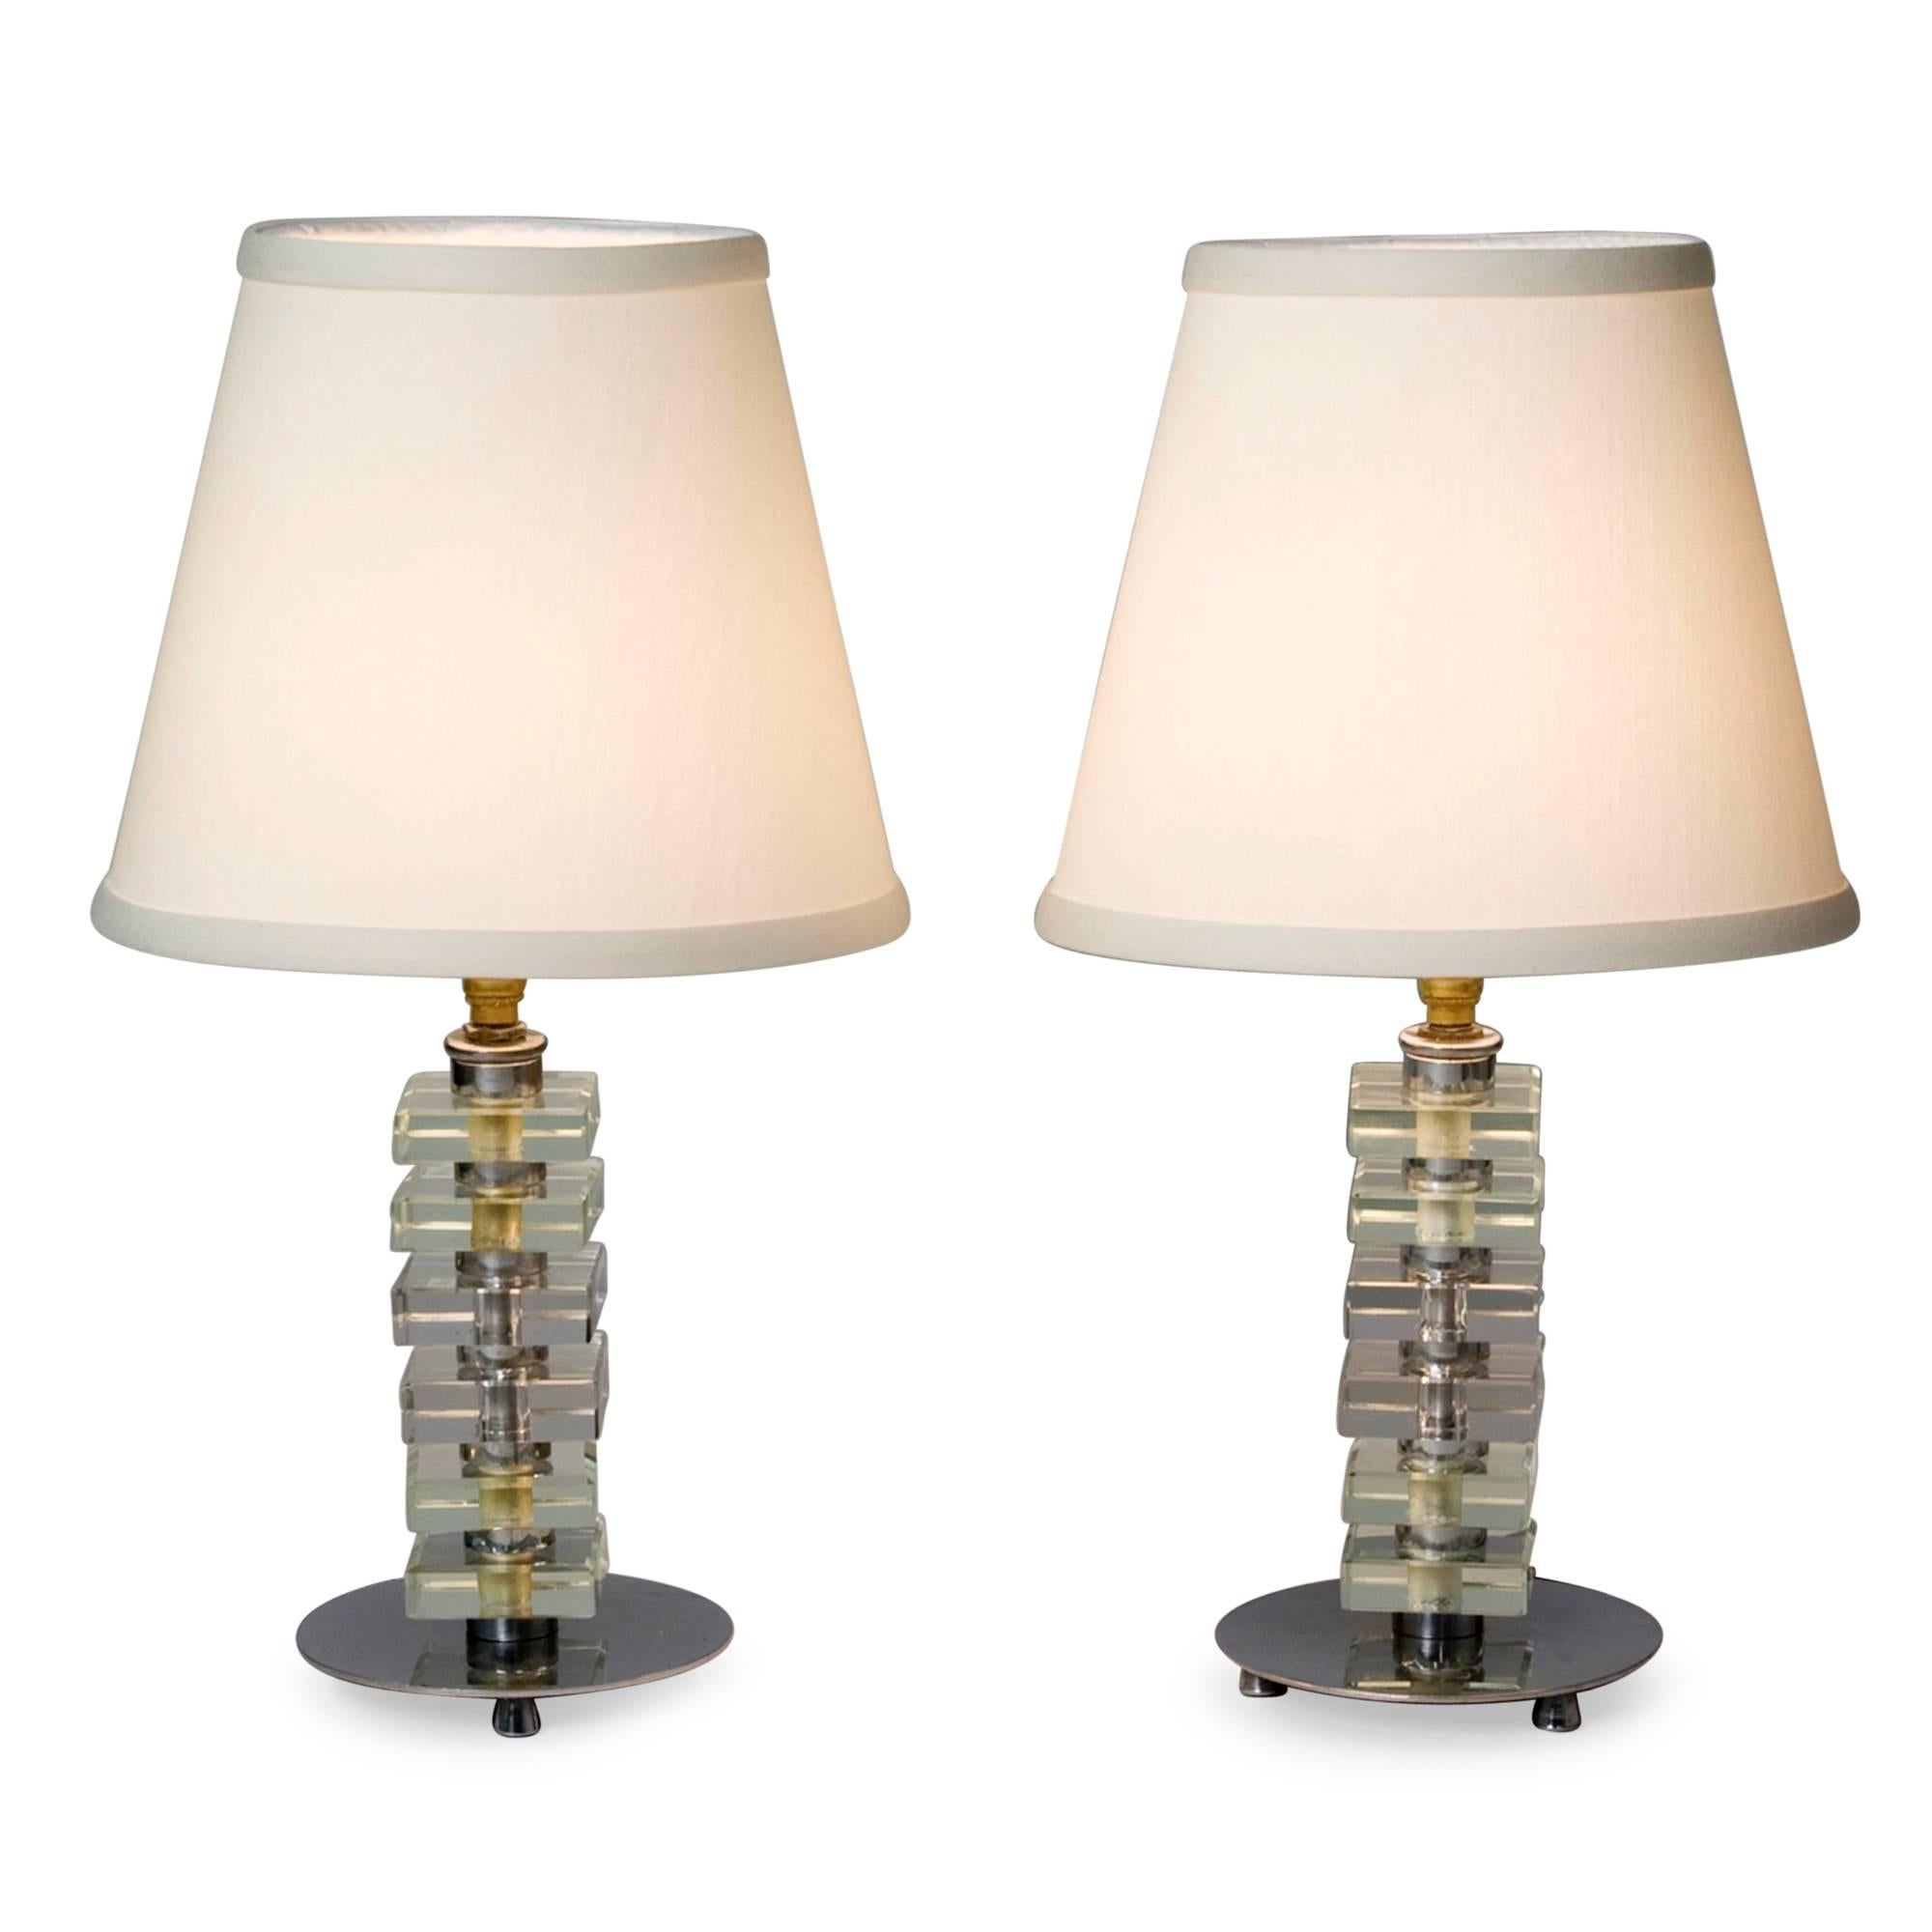 Pair of stacked glass boudoir lamps, the square glass elements separated by nickeled bronze discs, and resting on a larger nickeled bronze base having four feet, in custom silk shades, in the style of Jacques Adnet, French 1930s. Overall height 15